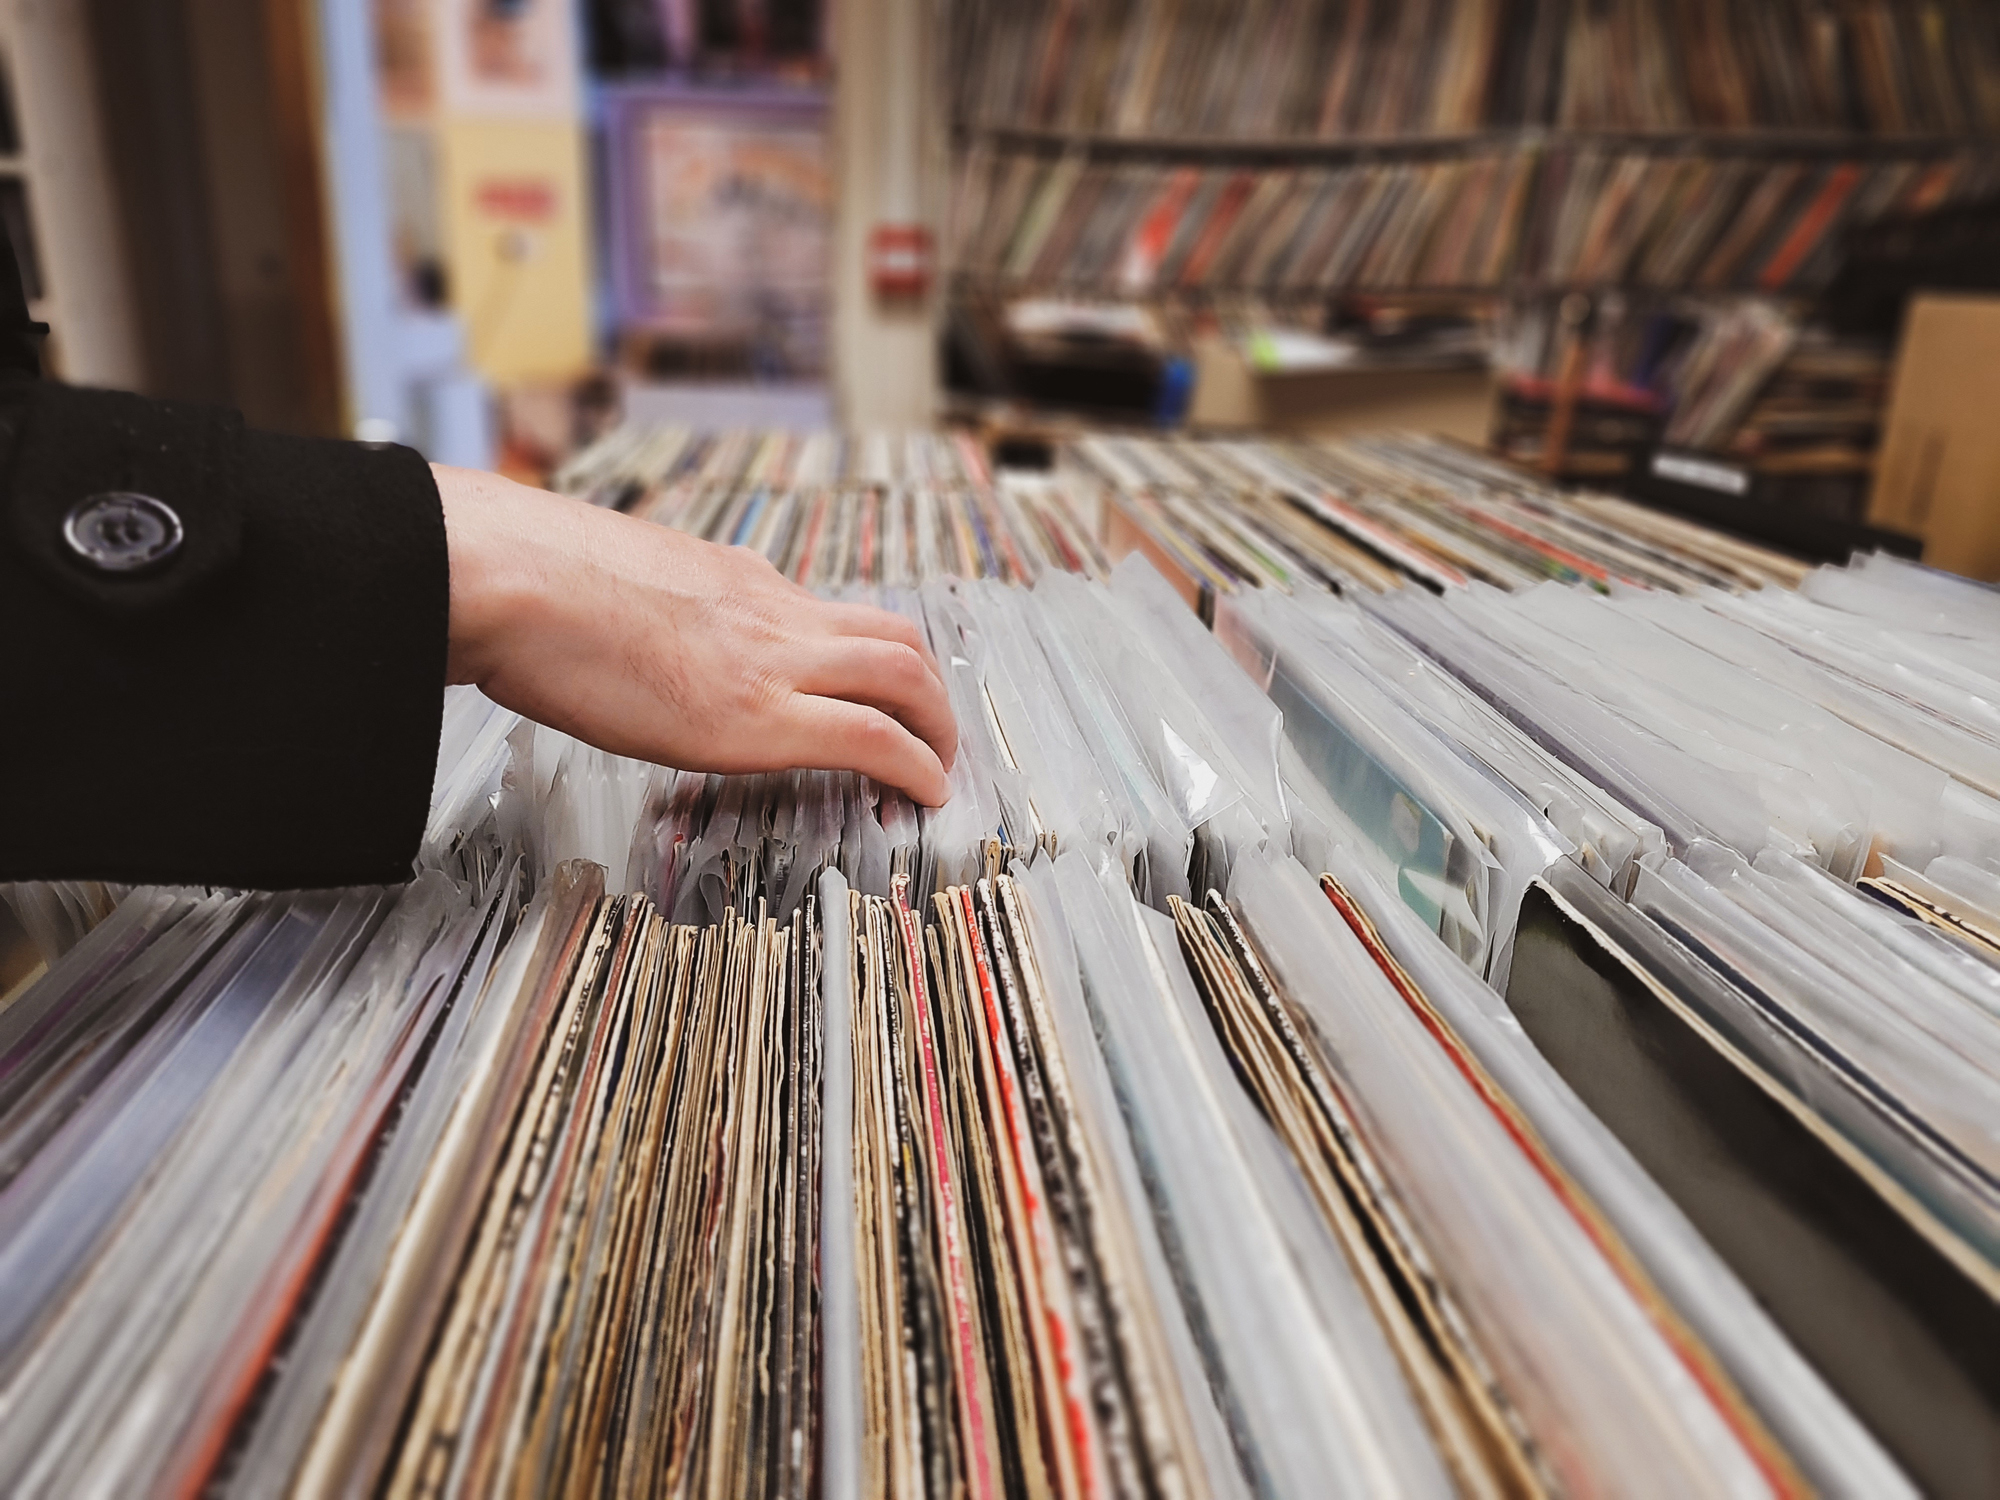 Person browsing through vinyl records in a music store